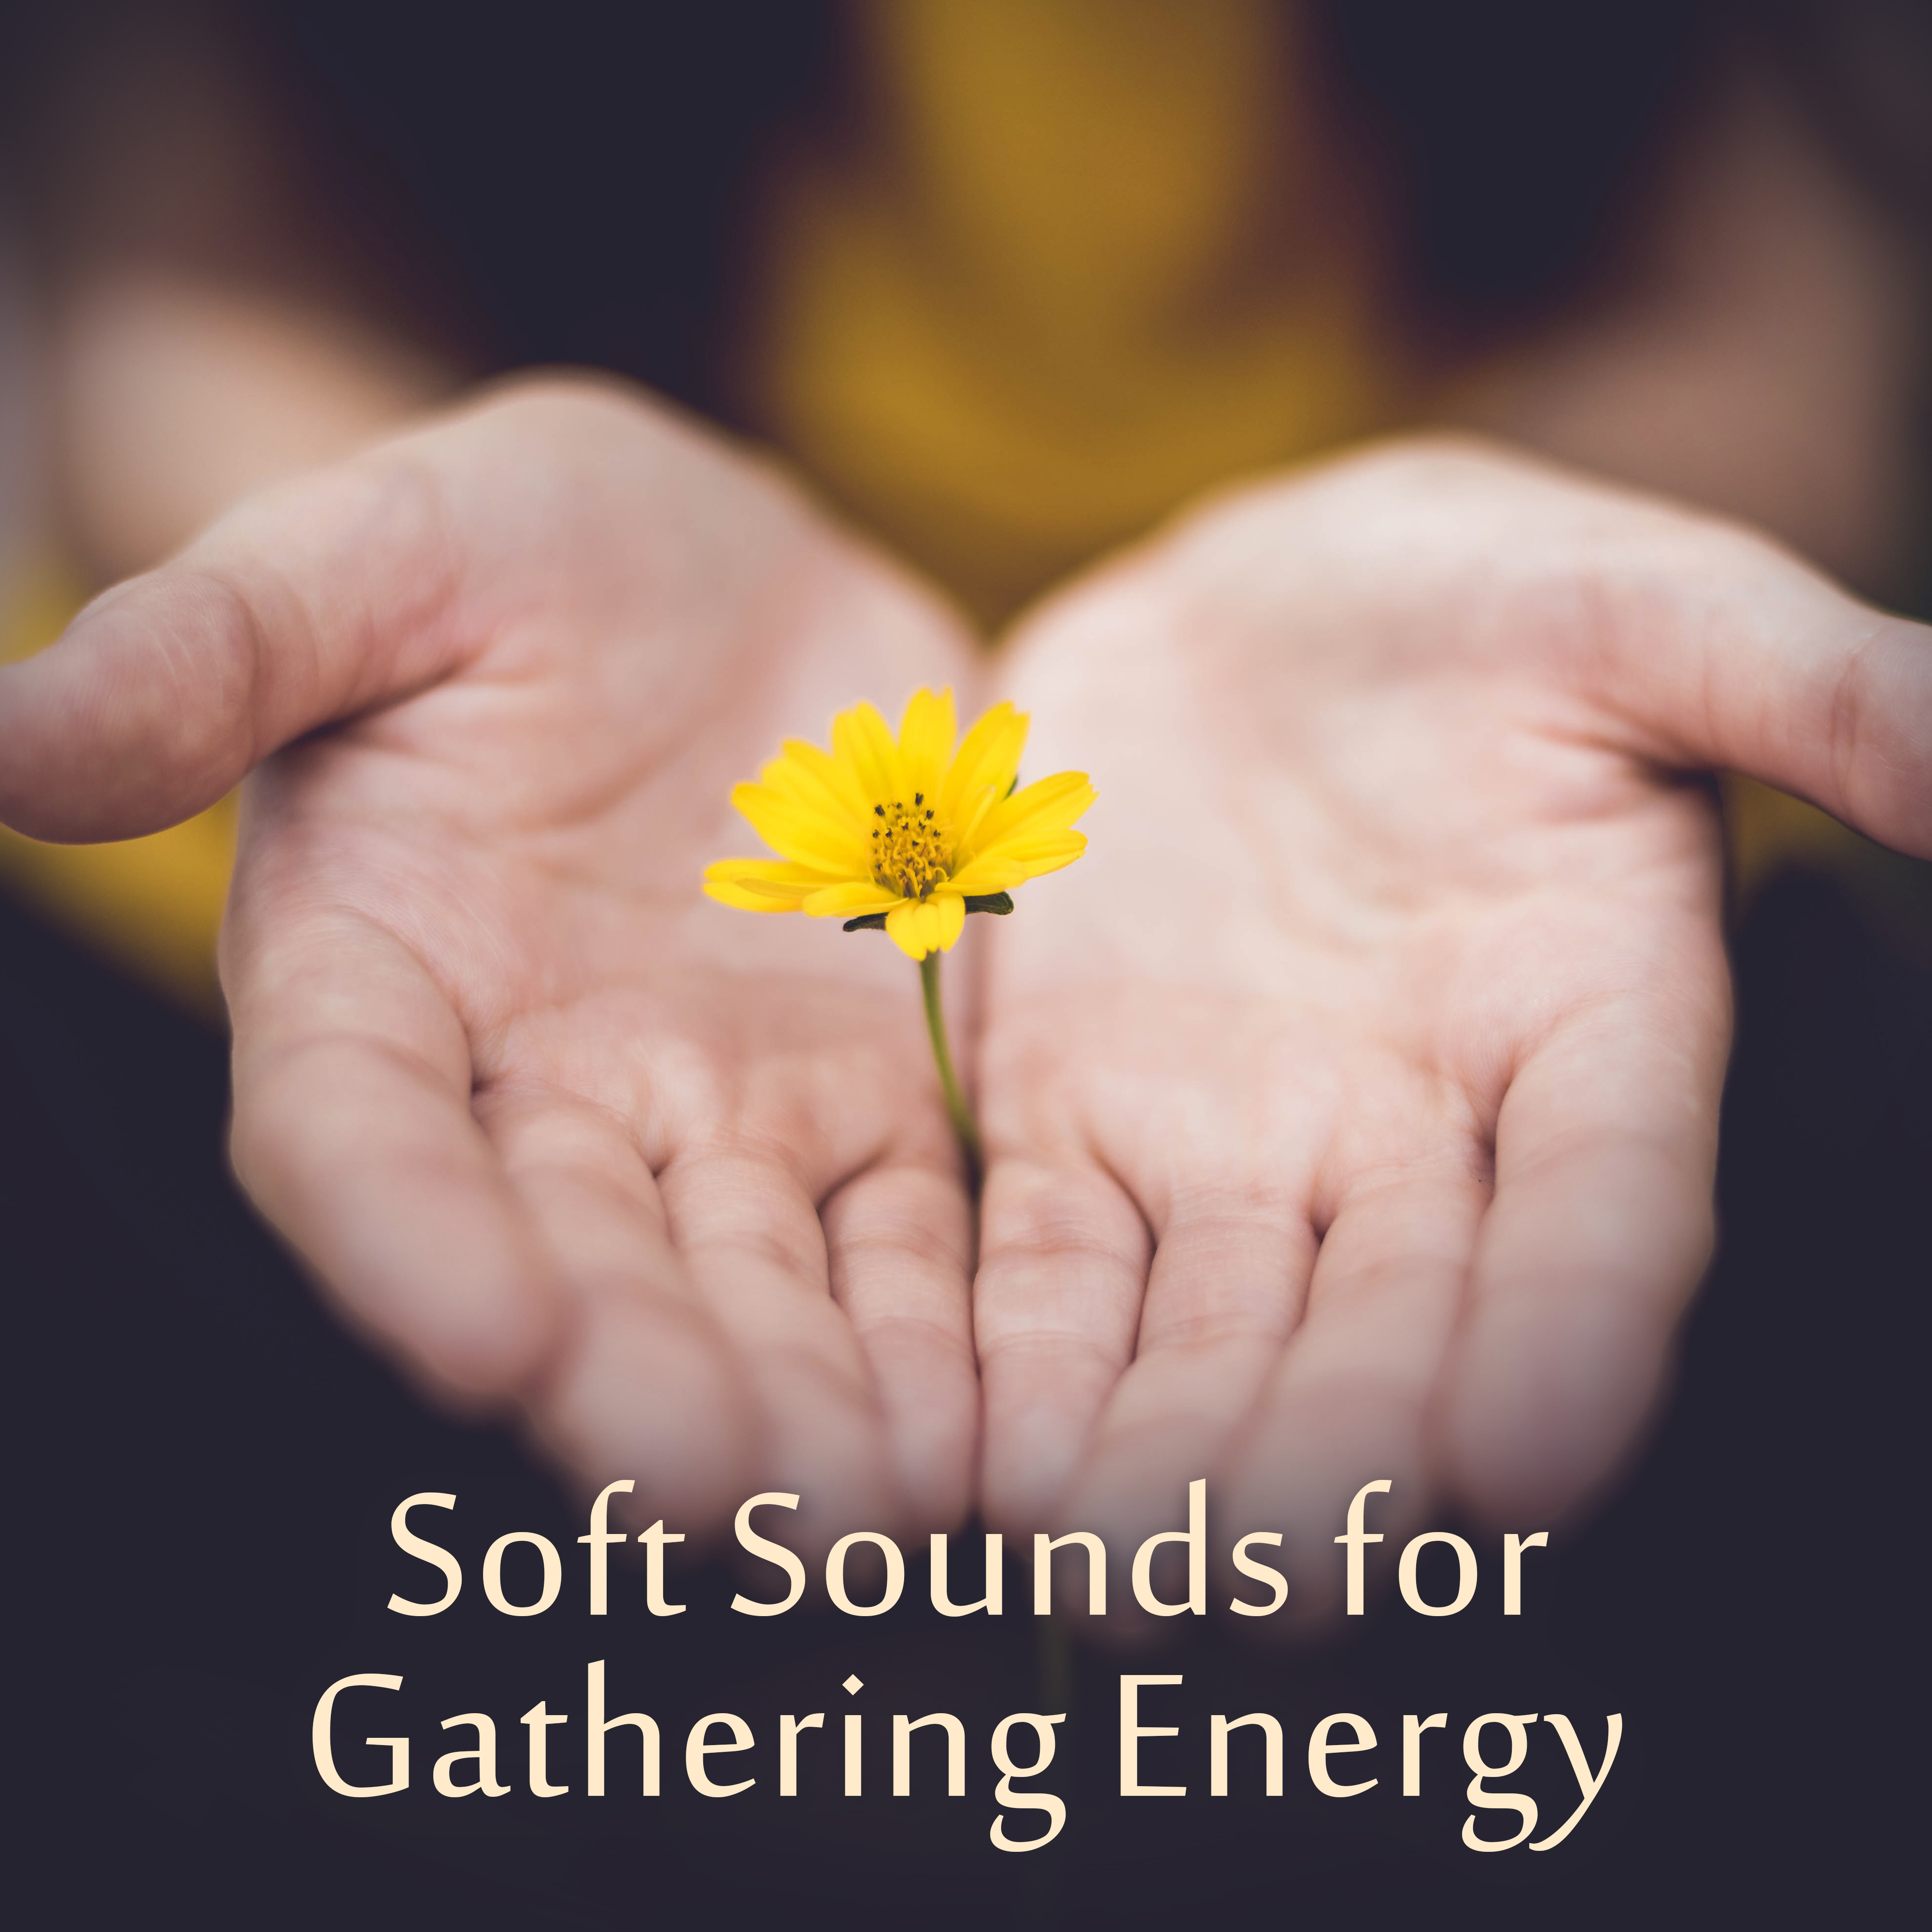 Soft Sounds for Gathering Energy – Easy Listening, Peaceful Songs, New Age Melodies to Calm Down, Rest a Bit